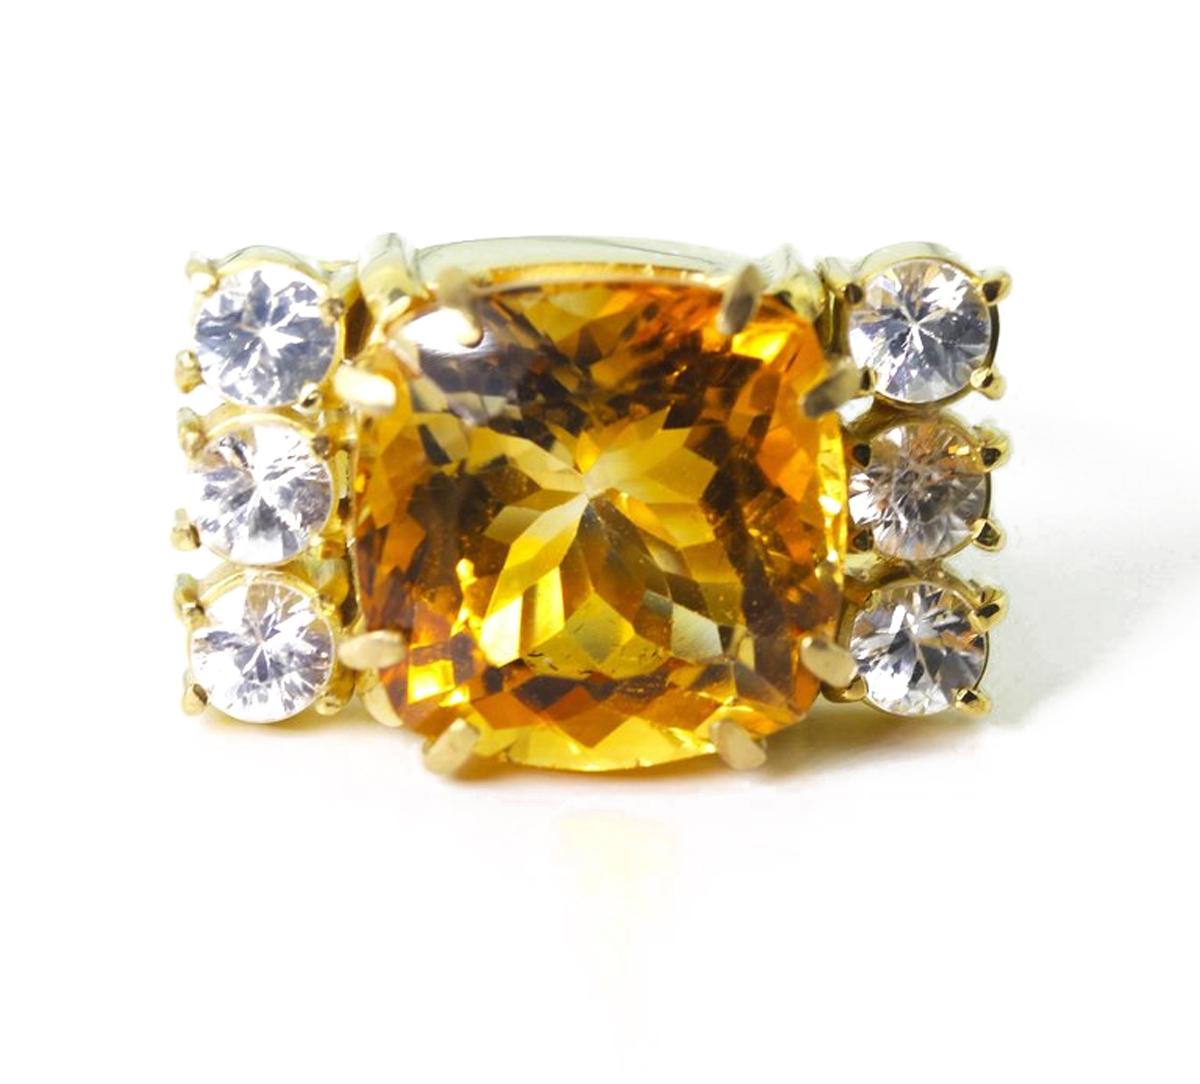 This sparkling multi-color flashes of goldy yellow 11.5 Carat Citrine (13.8 mm x 13.8 mm) is enhanced with approximately 1.2 Carats of brilliant white Sapphires set in a unique handmade 18 Kt yellow gold. The ring is a size 7 (sizable).  This is a